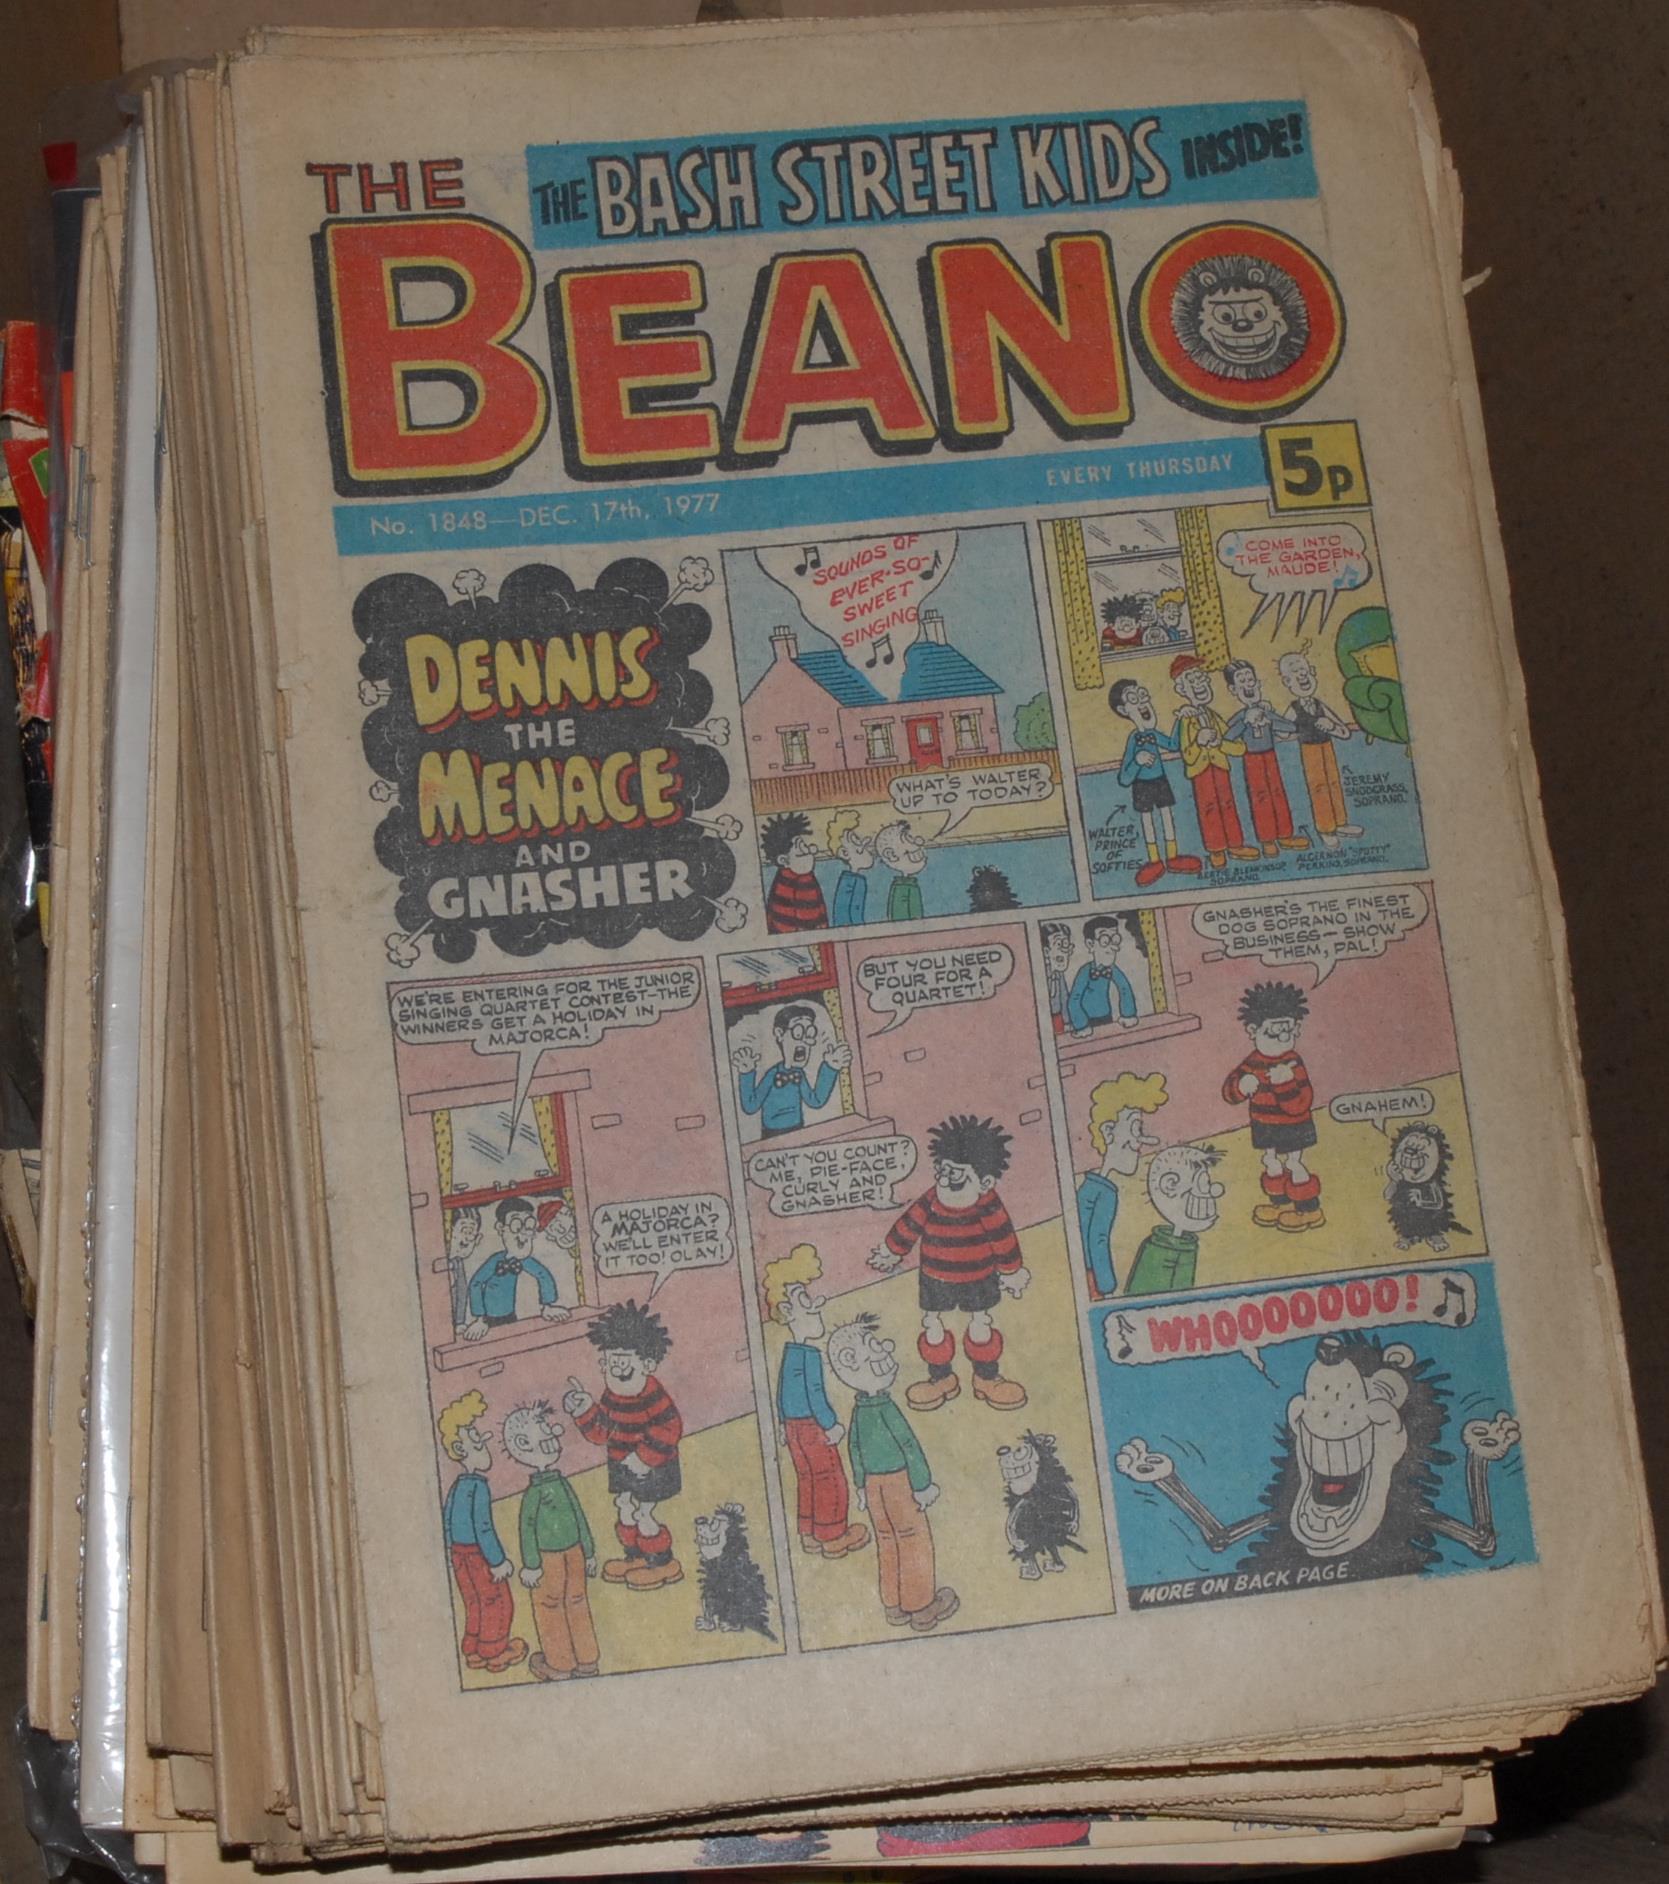 Comic Books - quantities of The Dandy of The Beano; some issues of Plug, Nutty, The Topper,